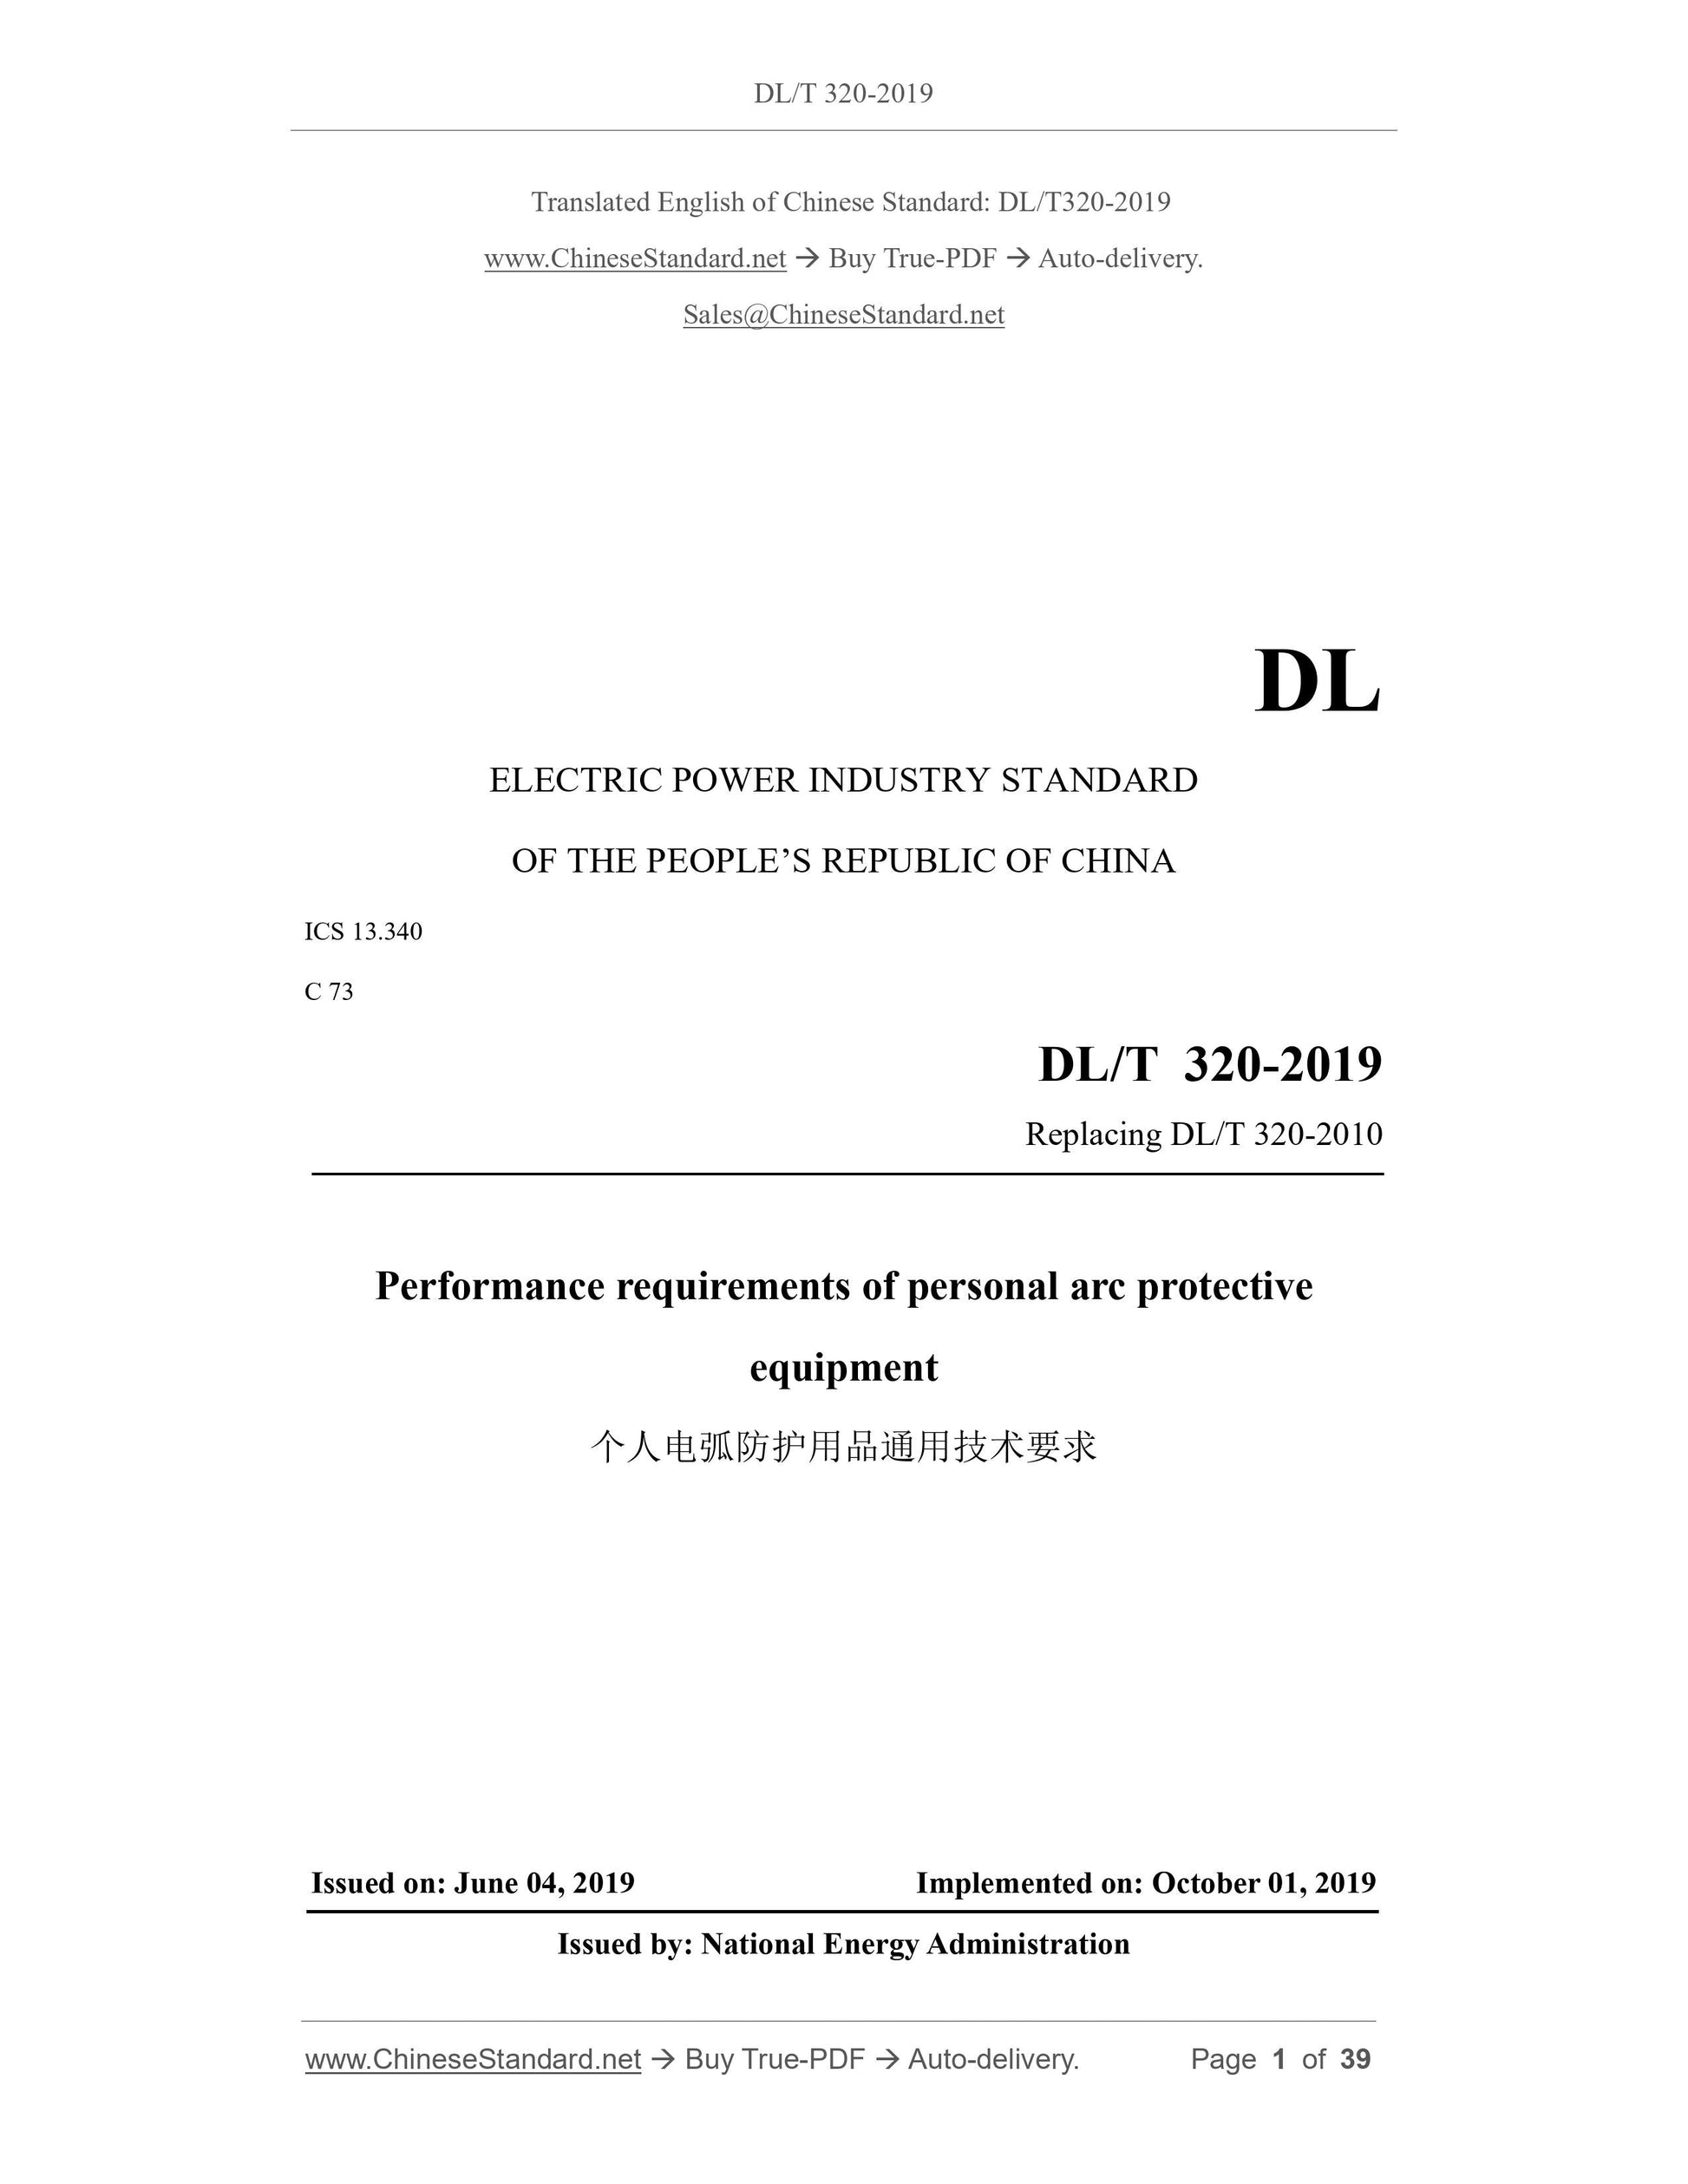 DL/T 320-2019 Page 1